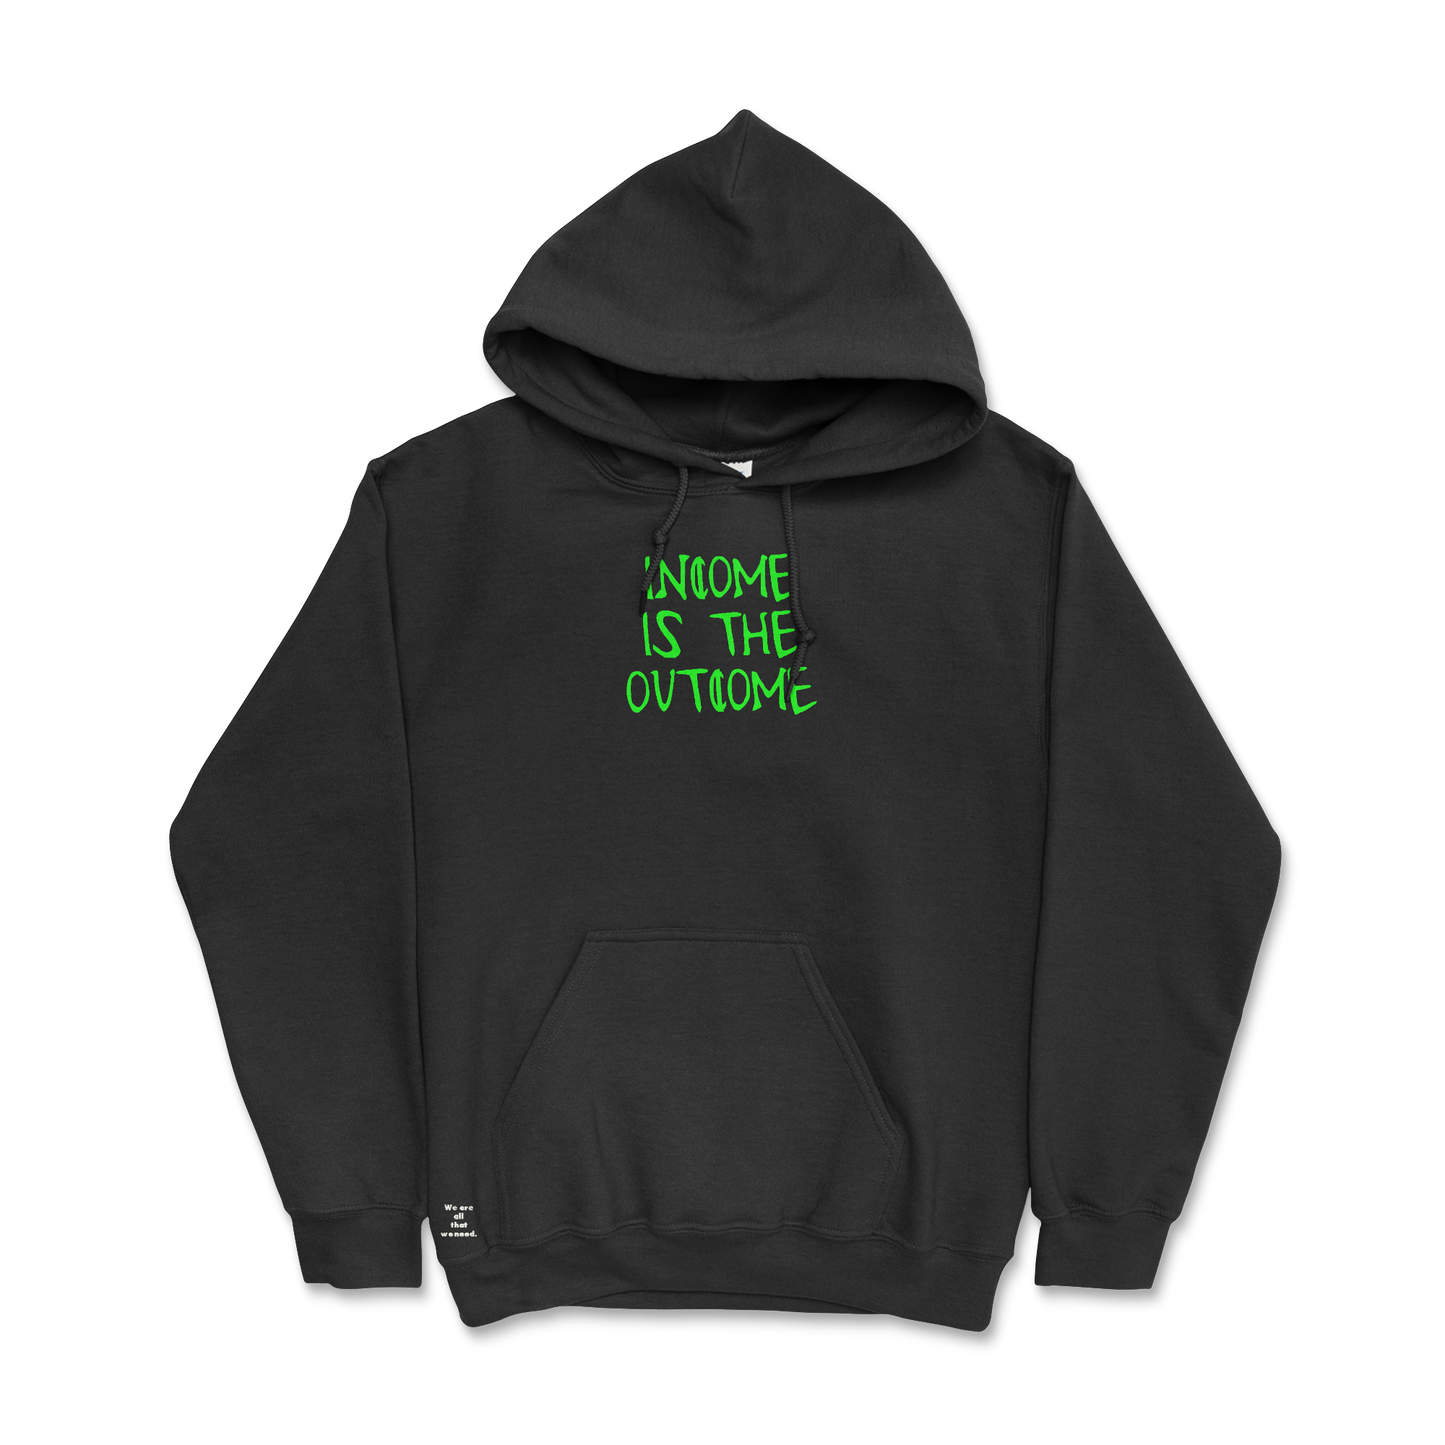 Only Outcome Hoodie